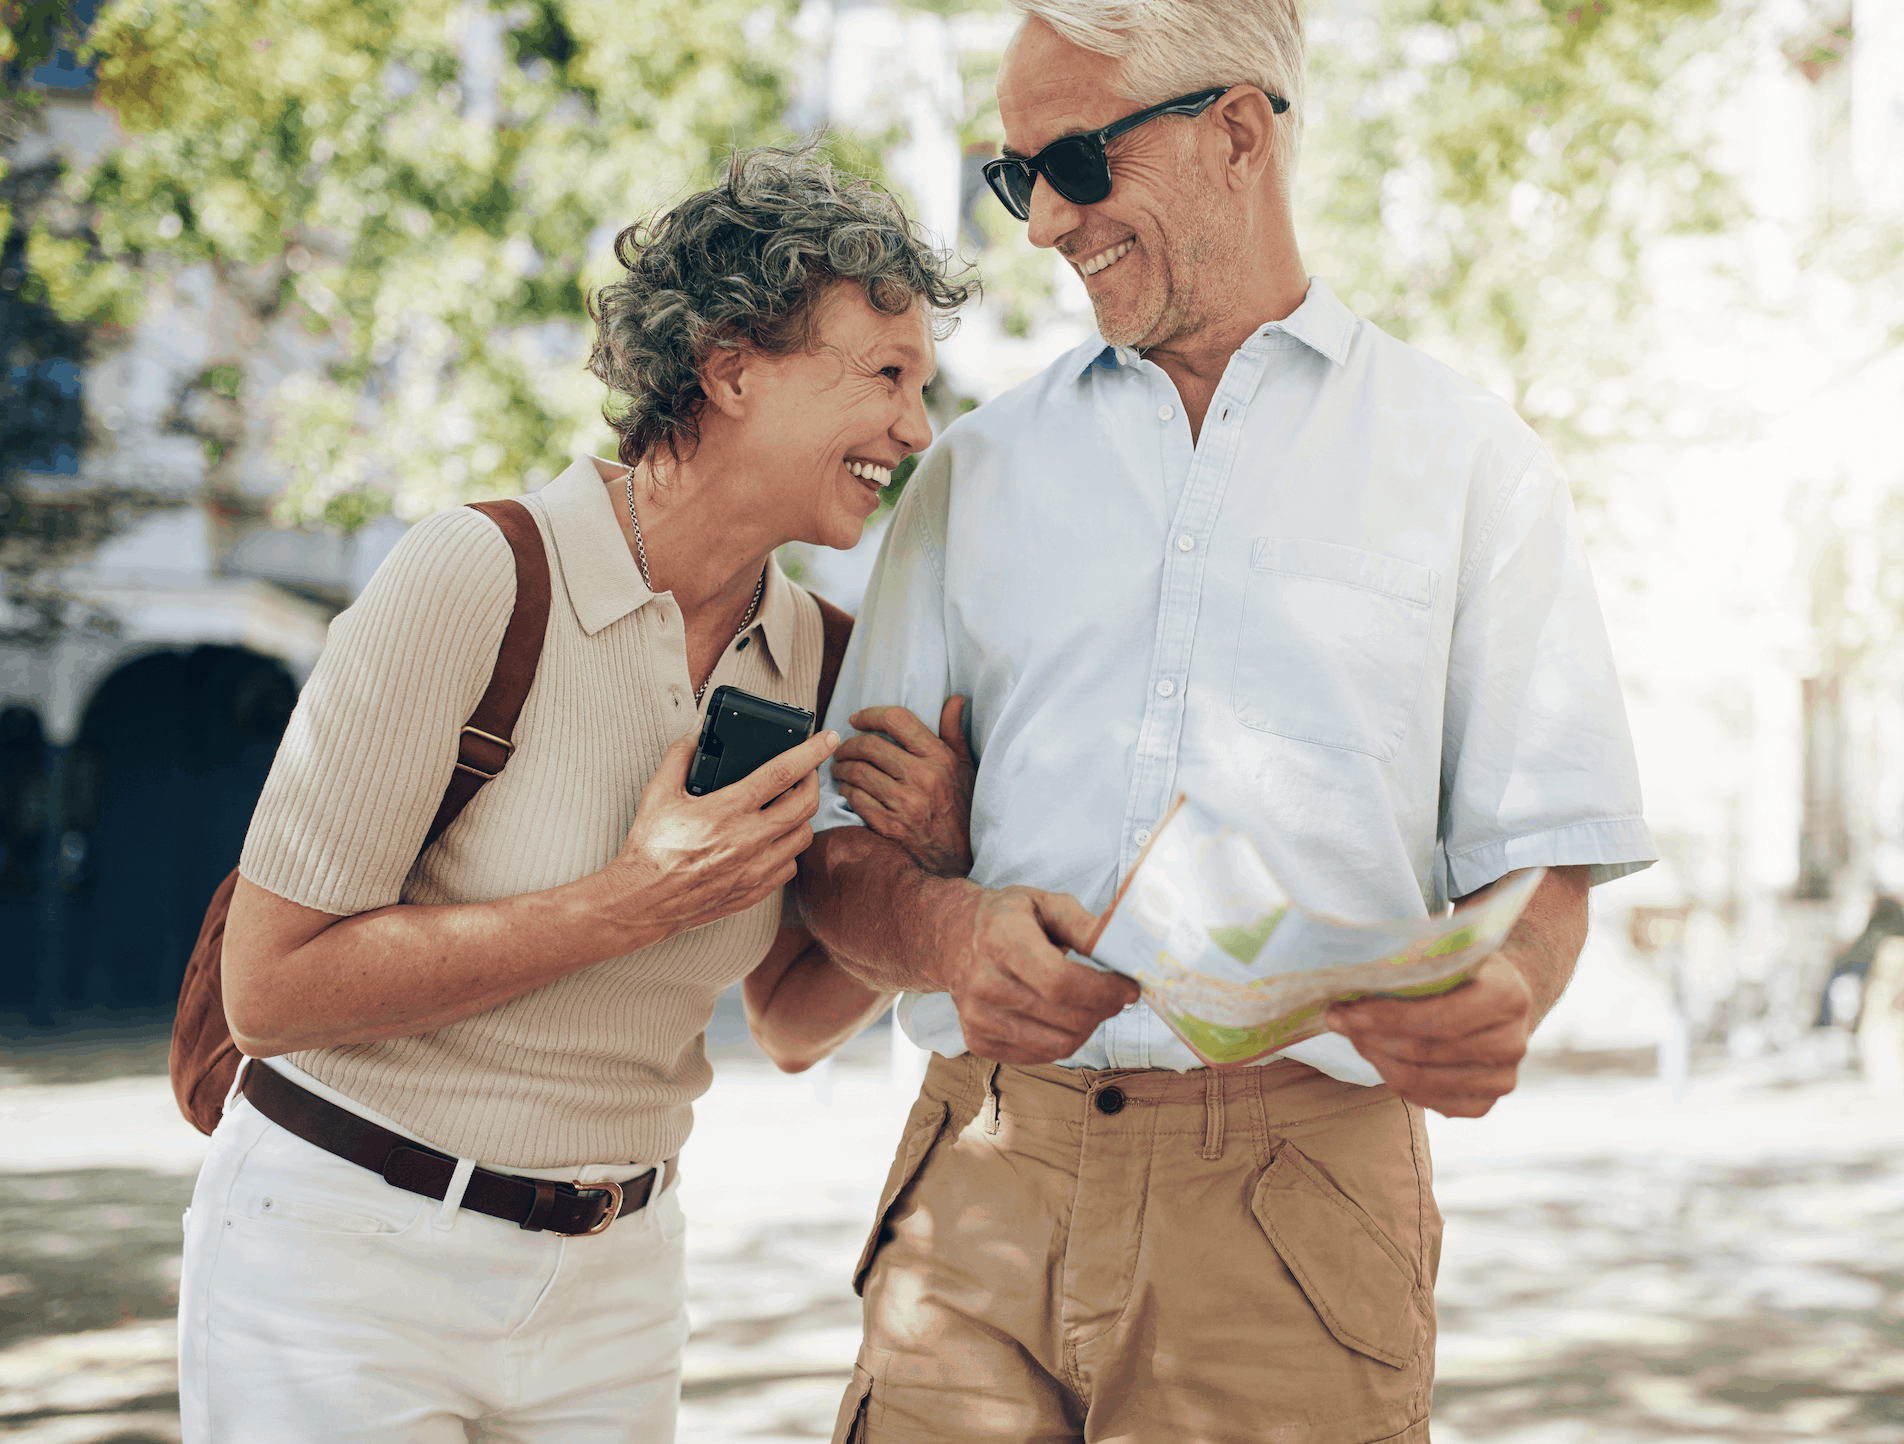 jobs for retired couples abroad